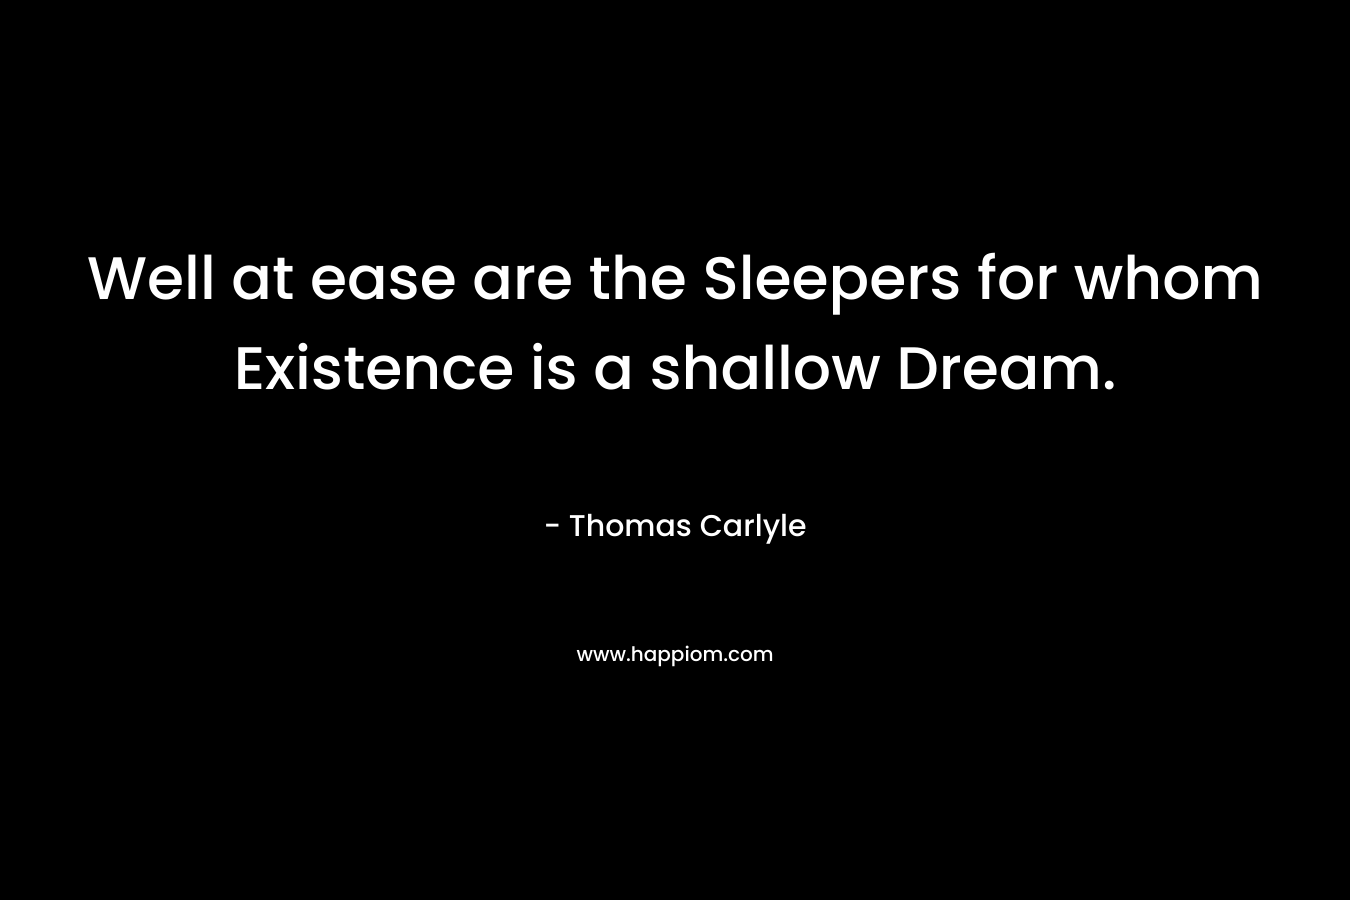 Well at ease are the Sleepers for whom Existence is a shallow Dream.